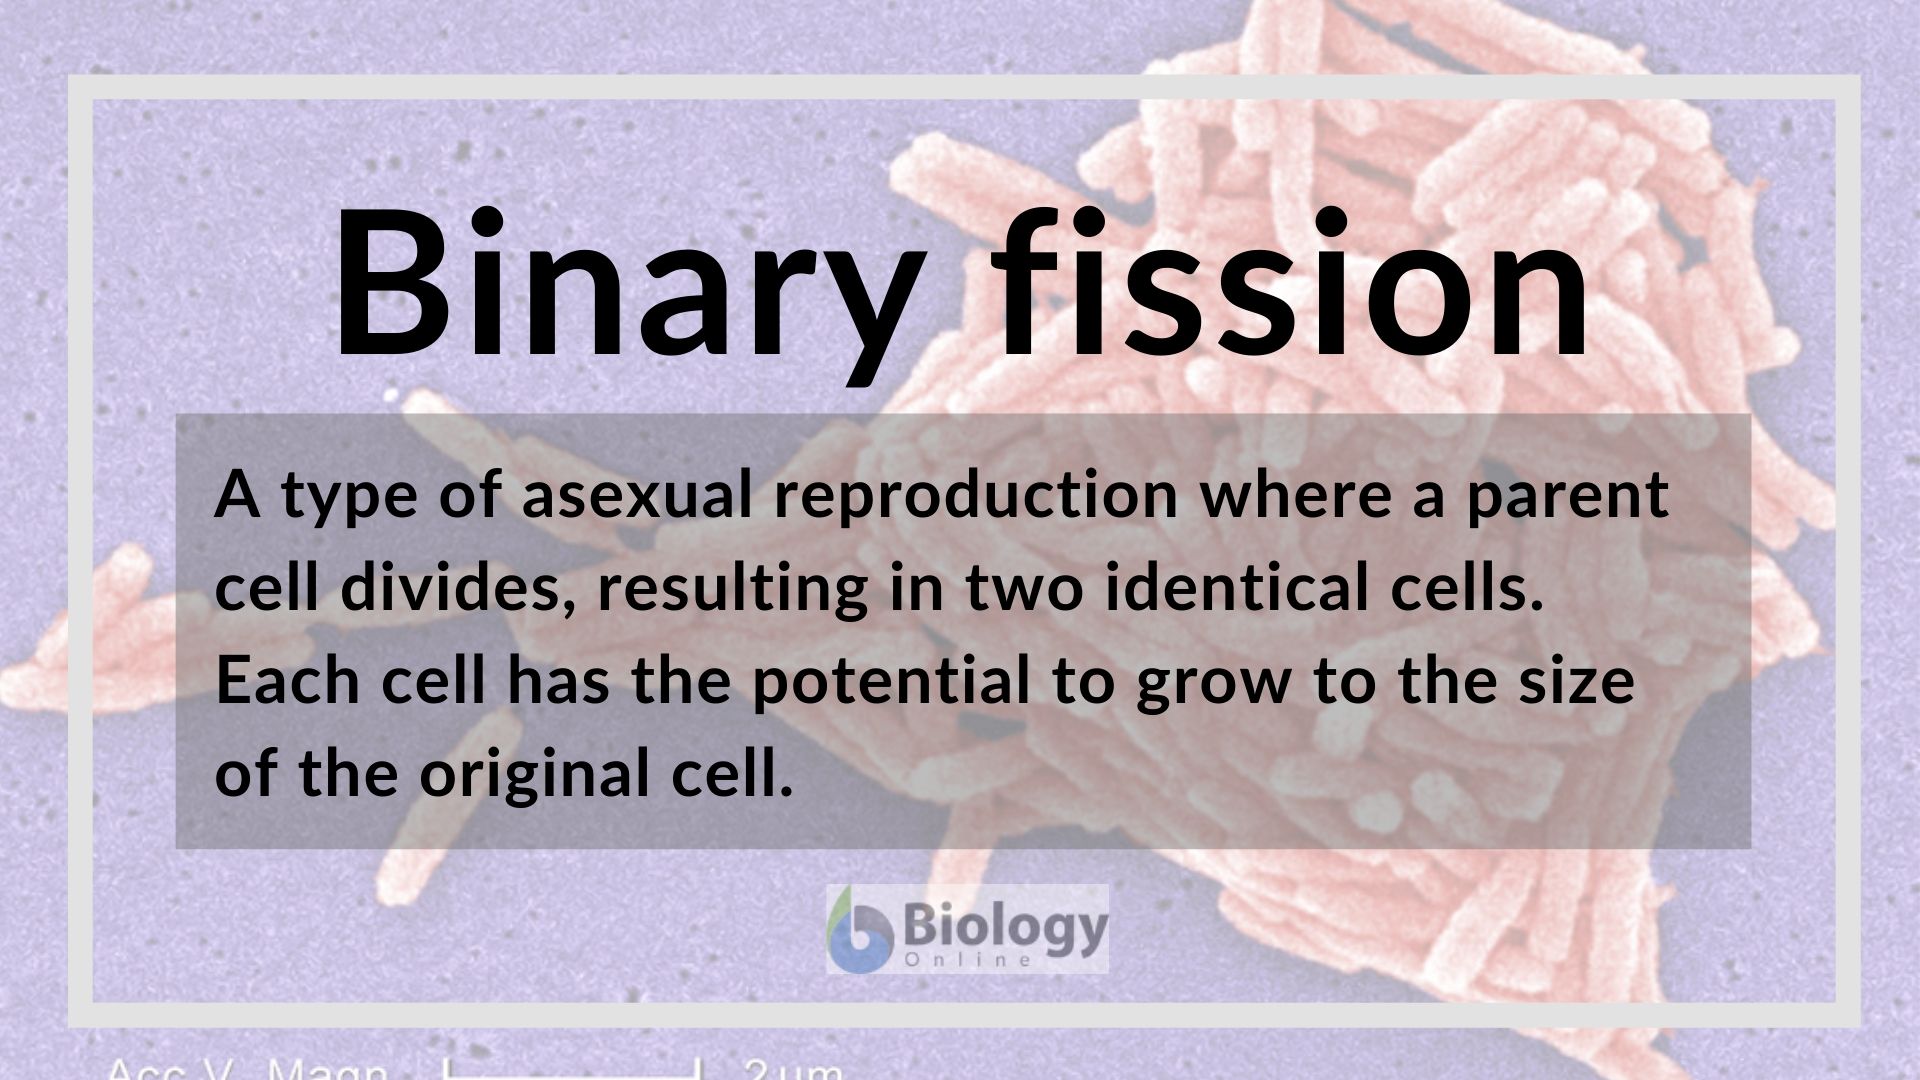 crustacean asexual fission example